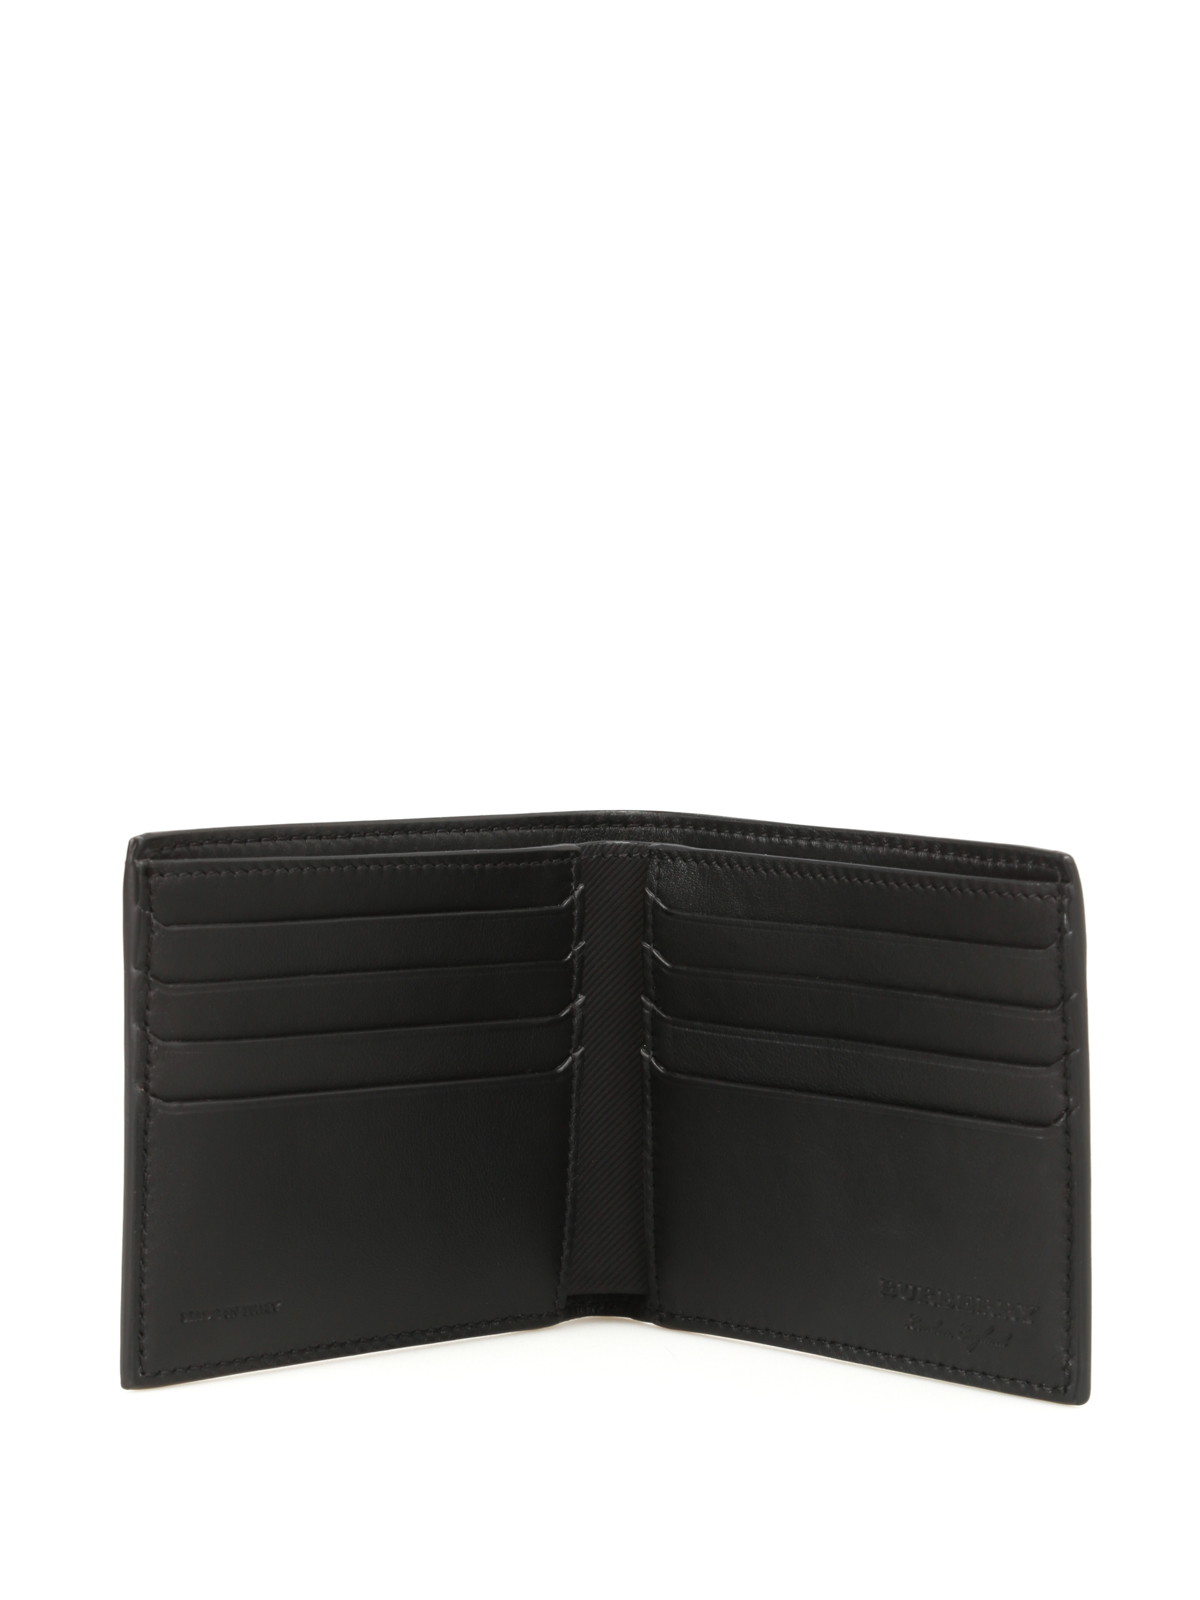 Burberry Embossed Leather Bifold Wallet Black